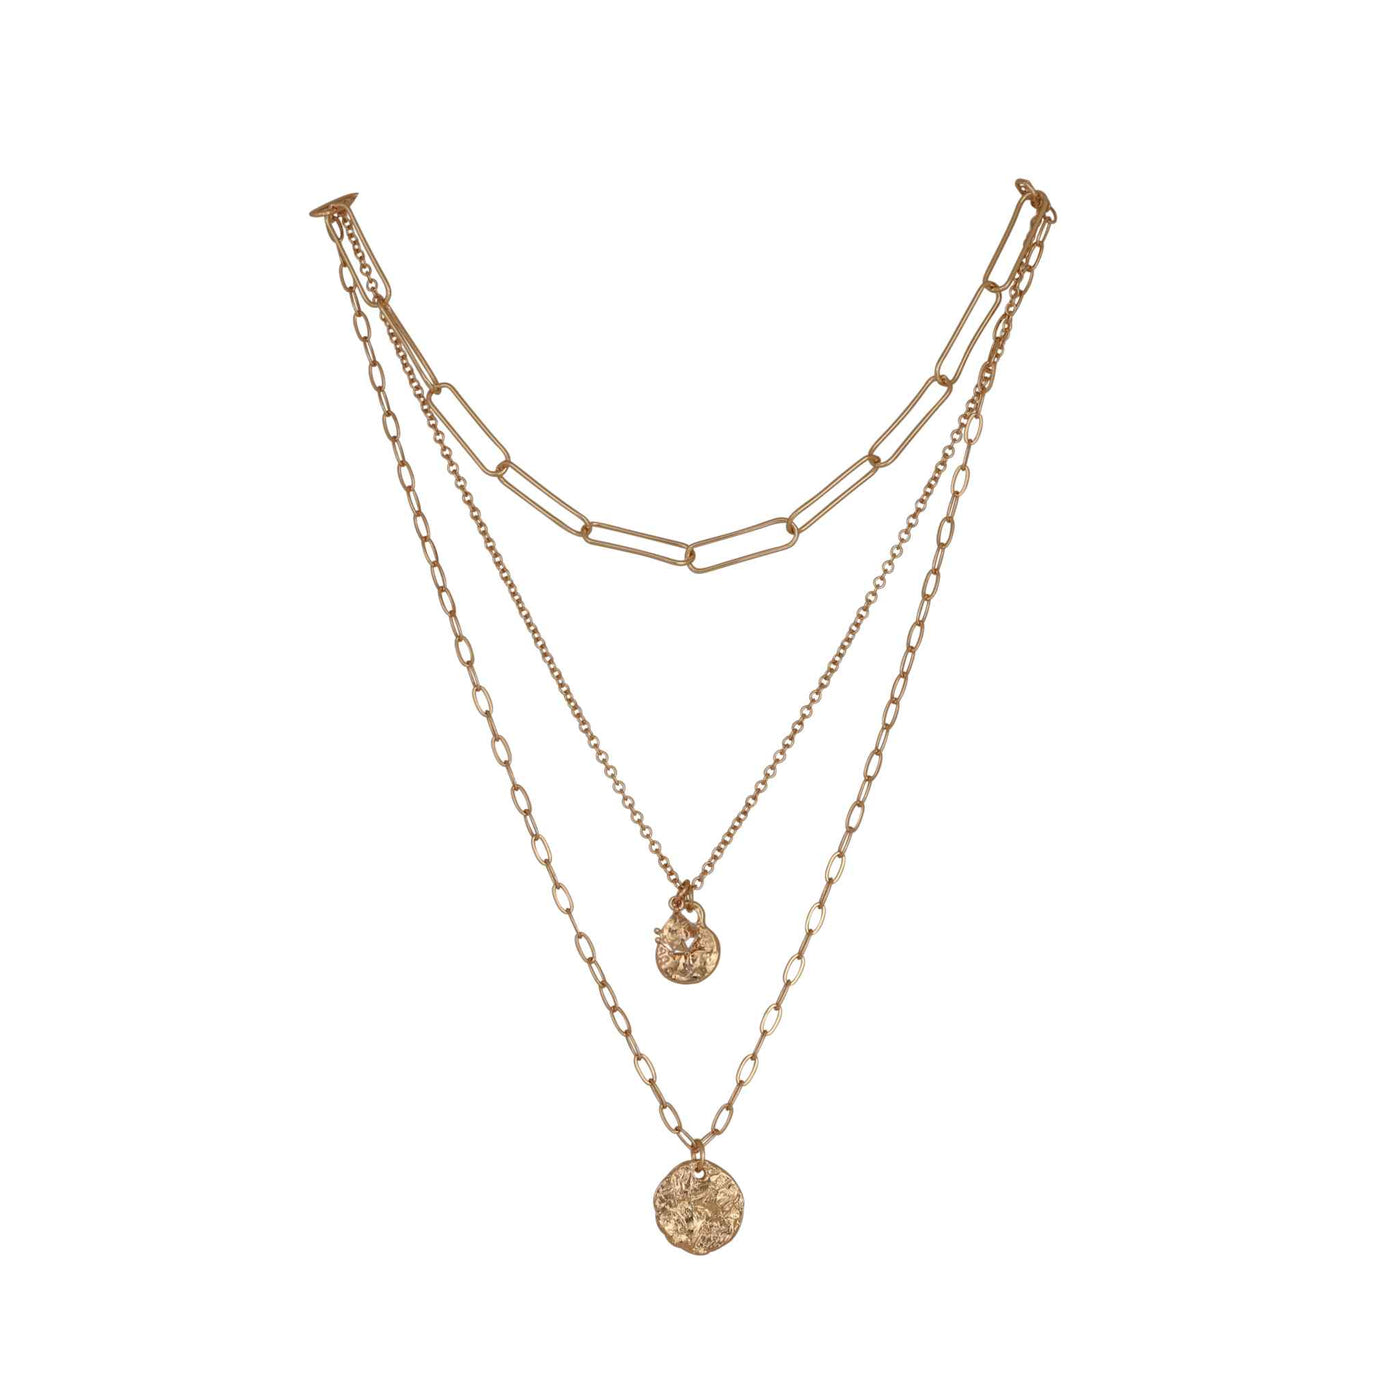 Merx - Short Mulit-Chain Necklace with Crystals in Gold